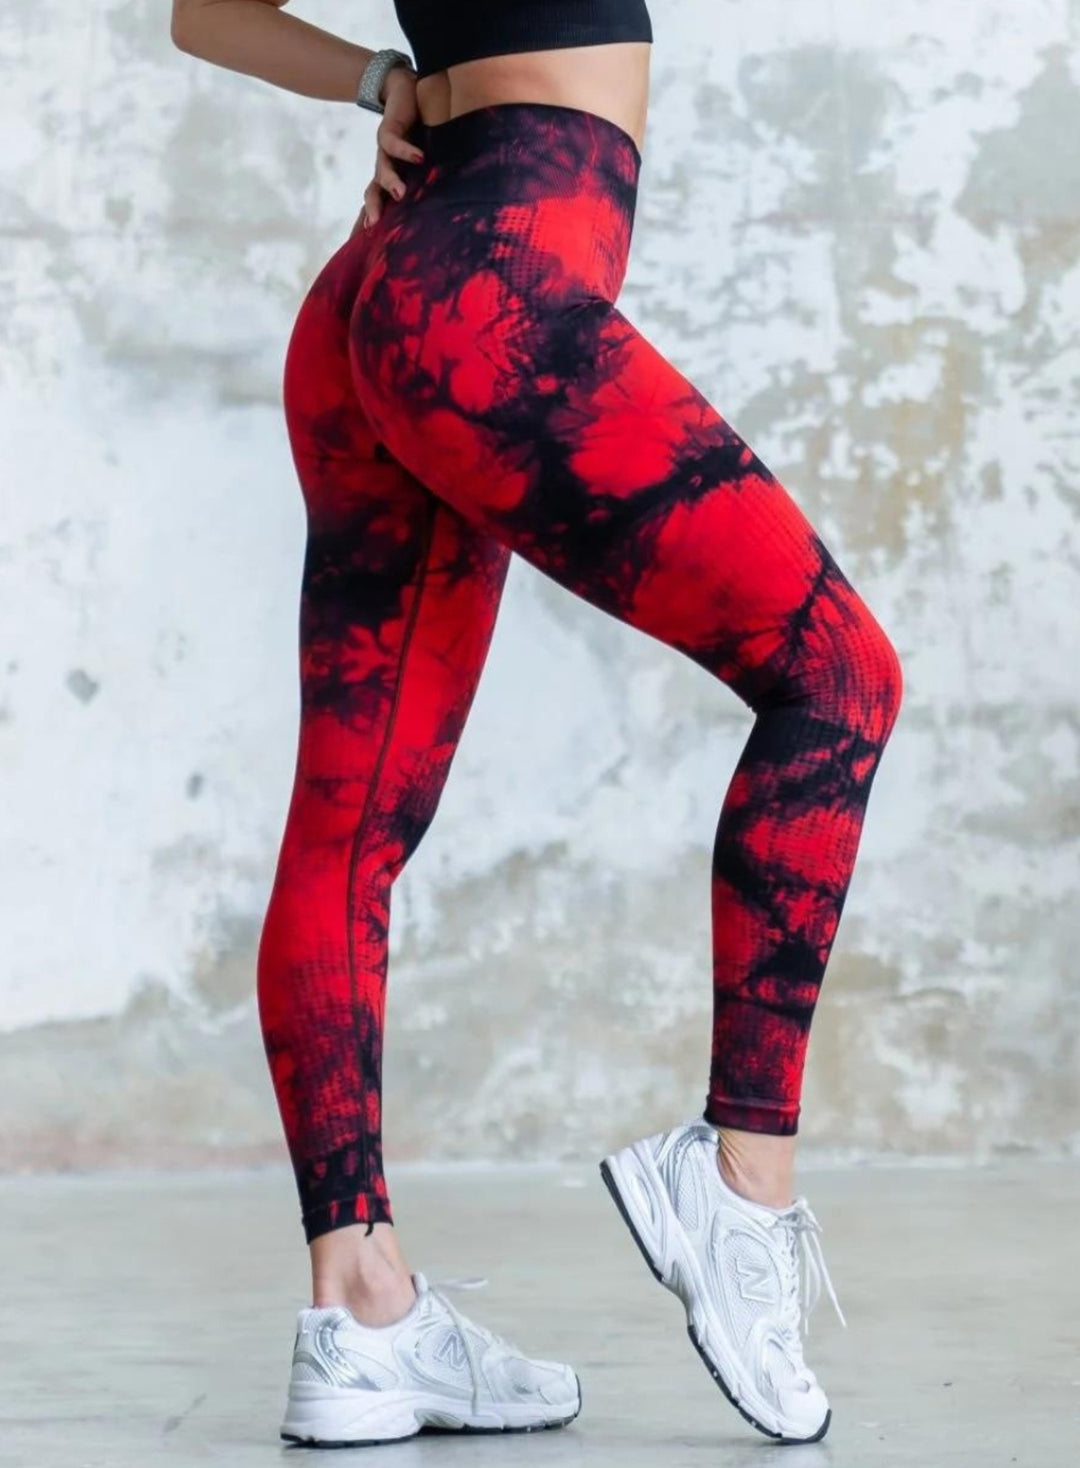 Black and Red Ombre Yoga Leggings, Gradient Women Girls Workout Half Dip  Tie Dye Workout Pants Printed Sexy Plus Size Festival Tights -  Canada